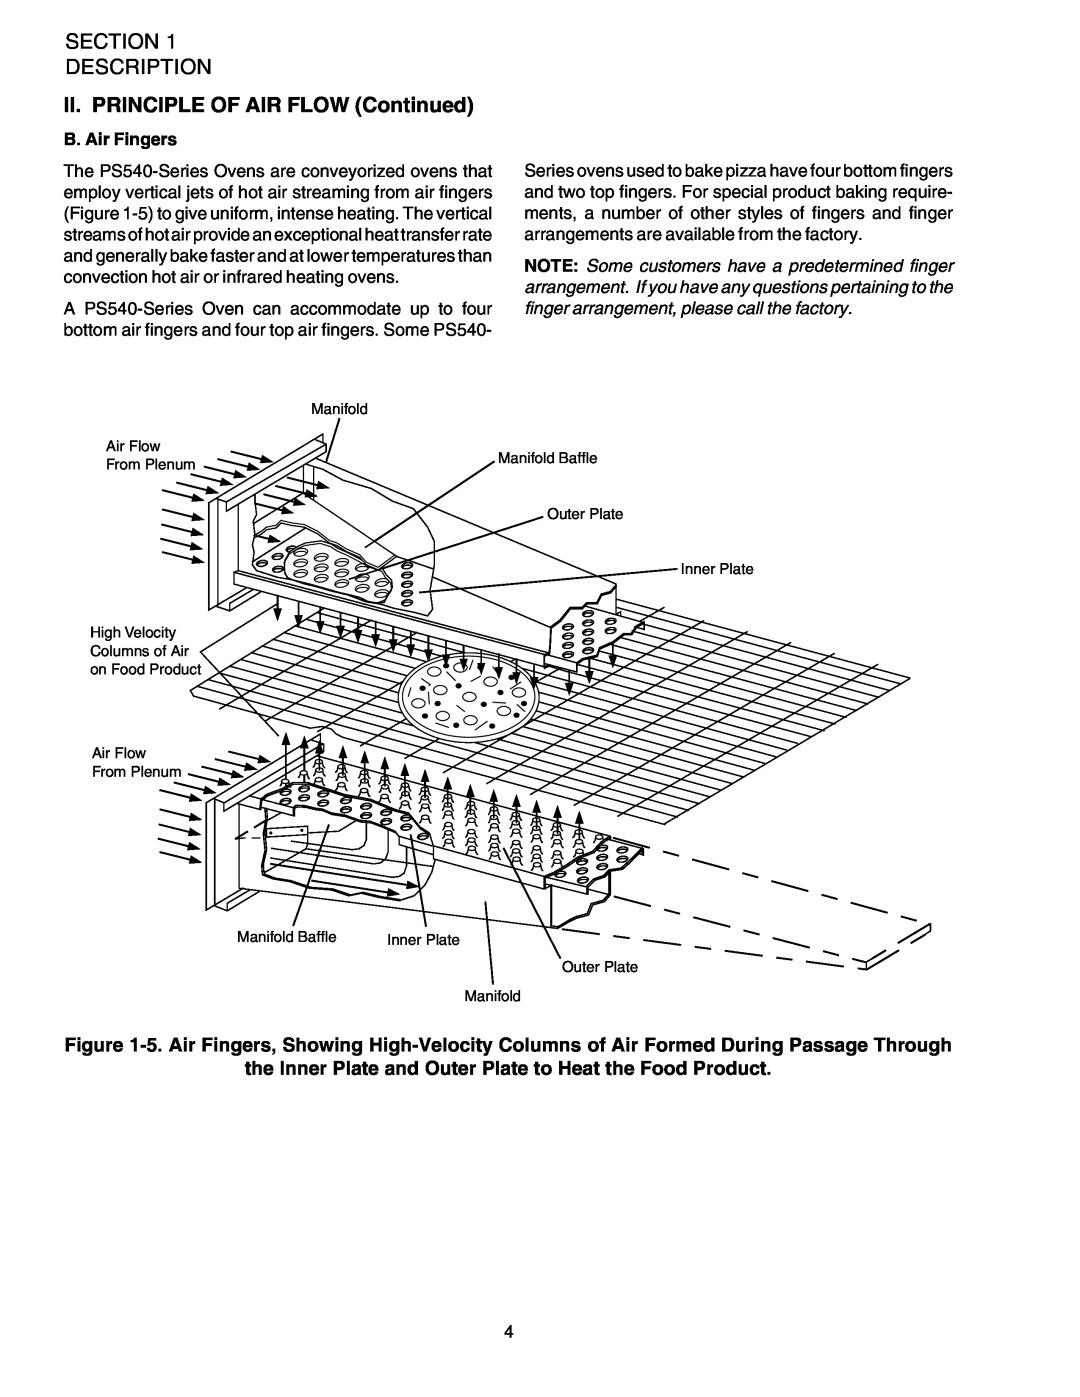 Middleby Marshall PS540 installation manual Section Description, II. PRINCIPLE OF AIR FLOW Continued, B. Air Fingers 